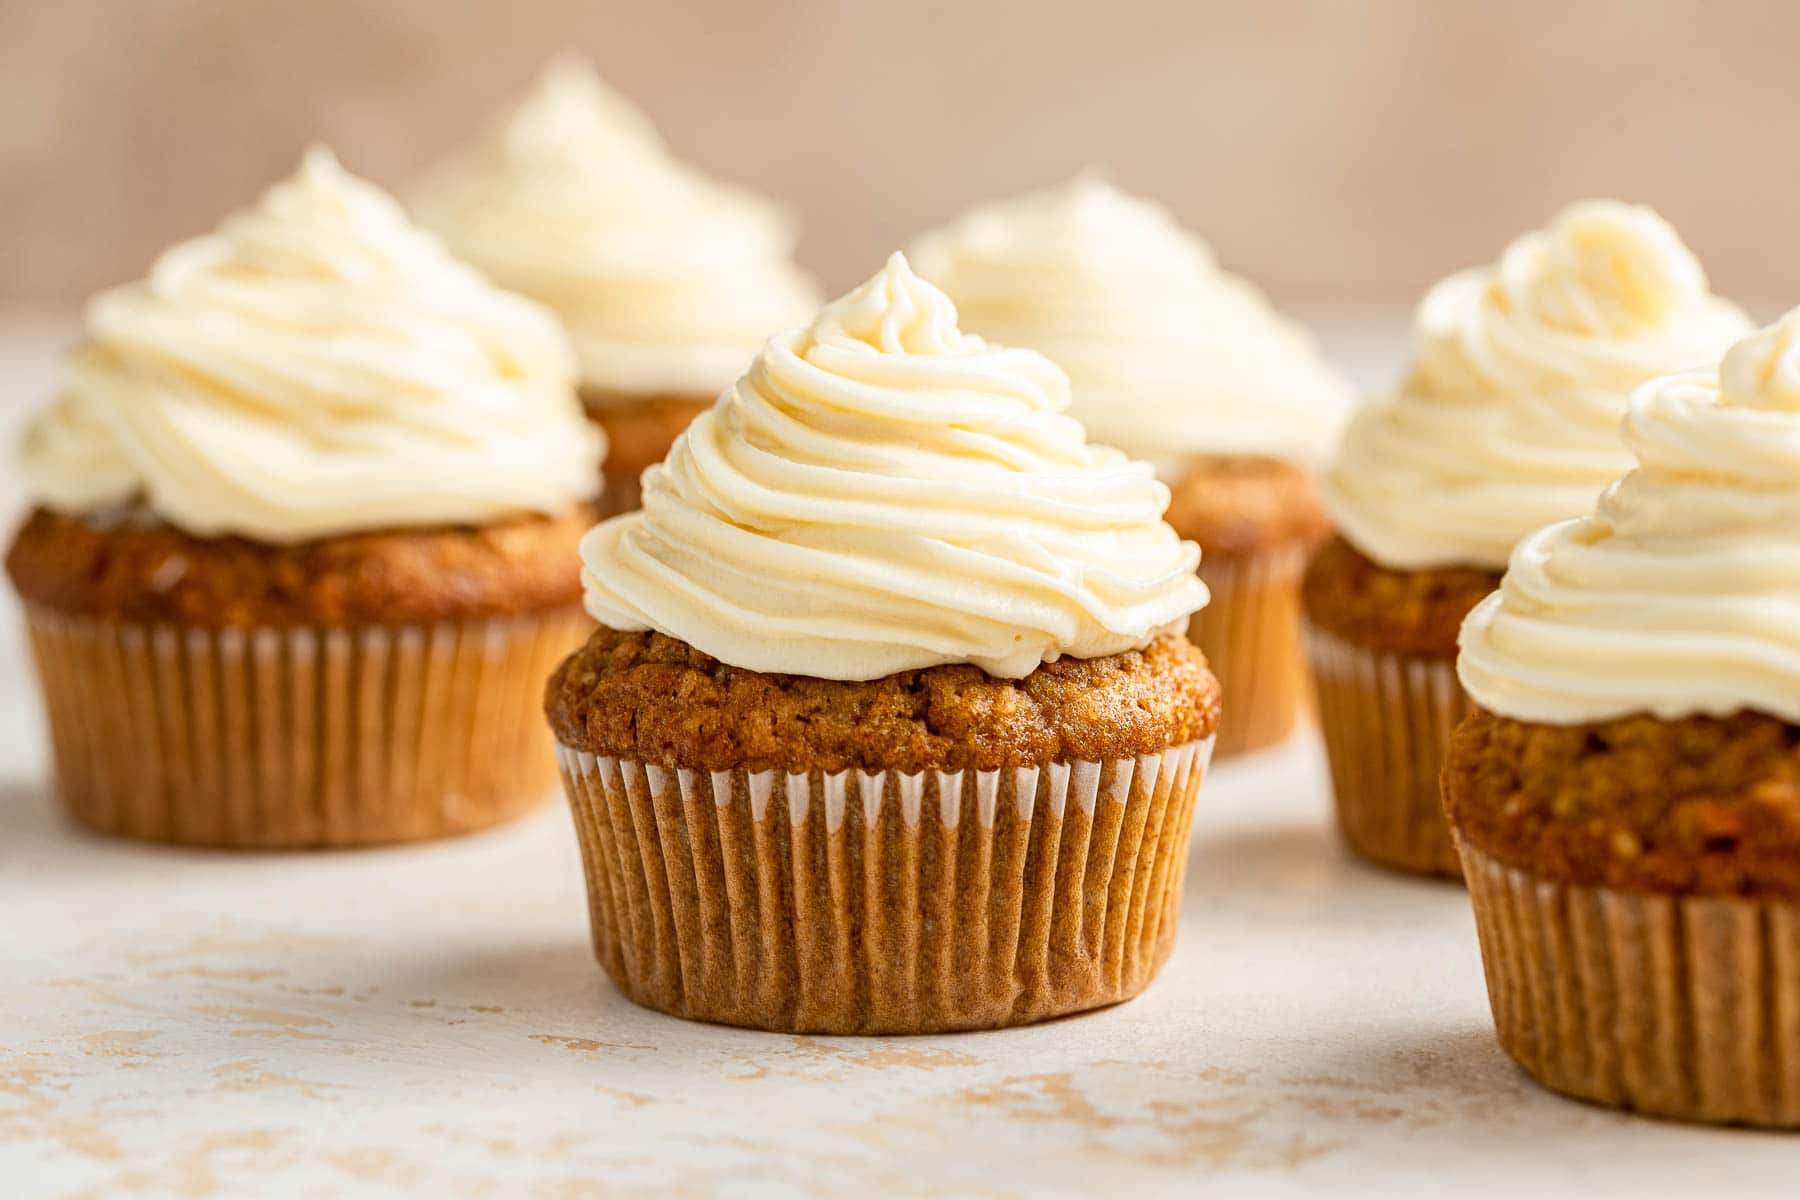 Six frosted carrot cake cupcakes with white frosting.